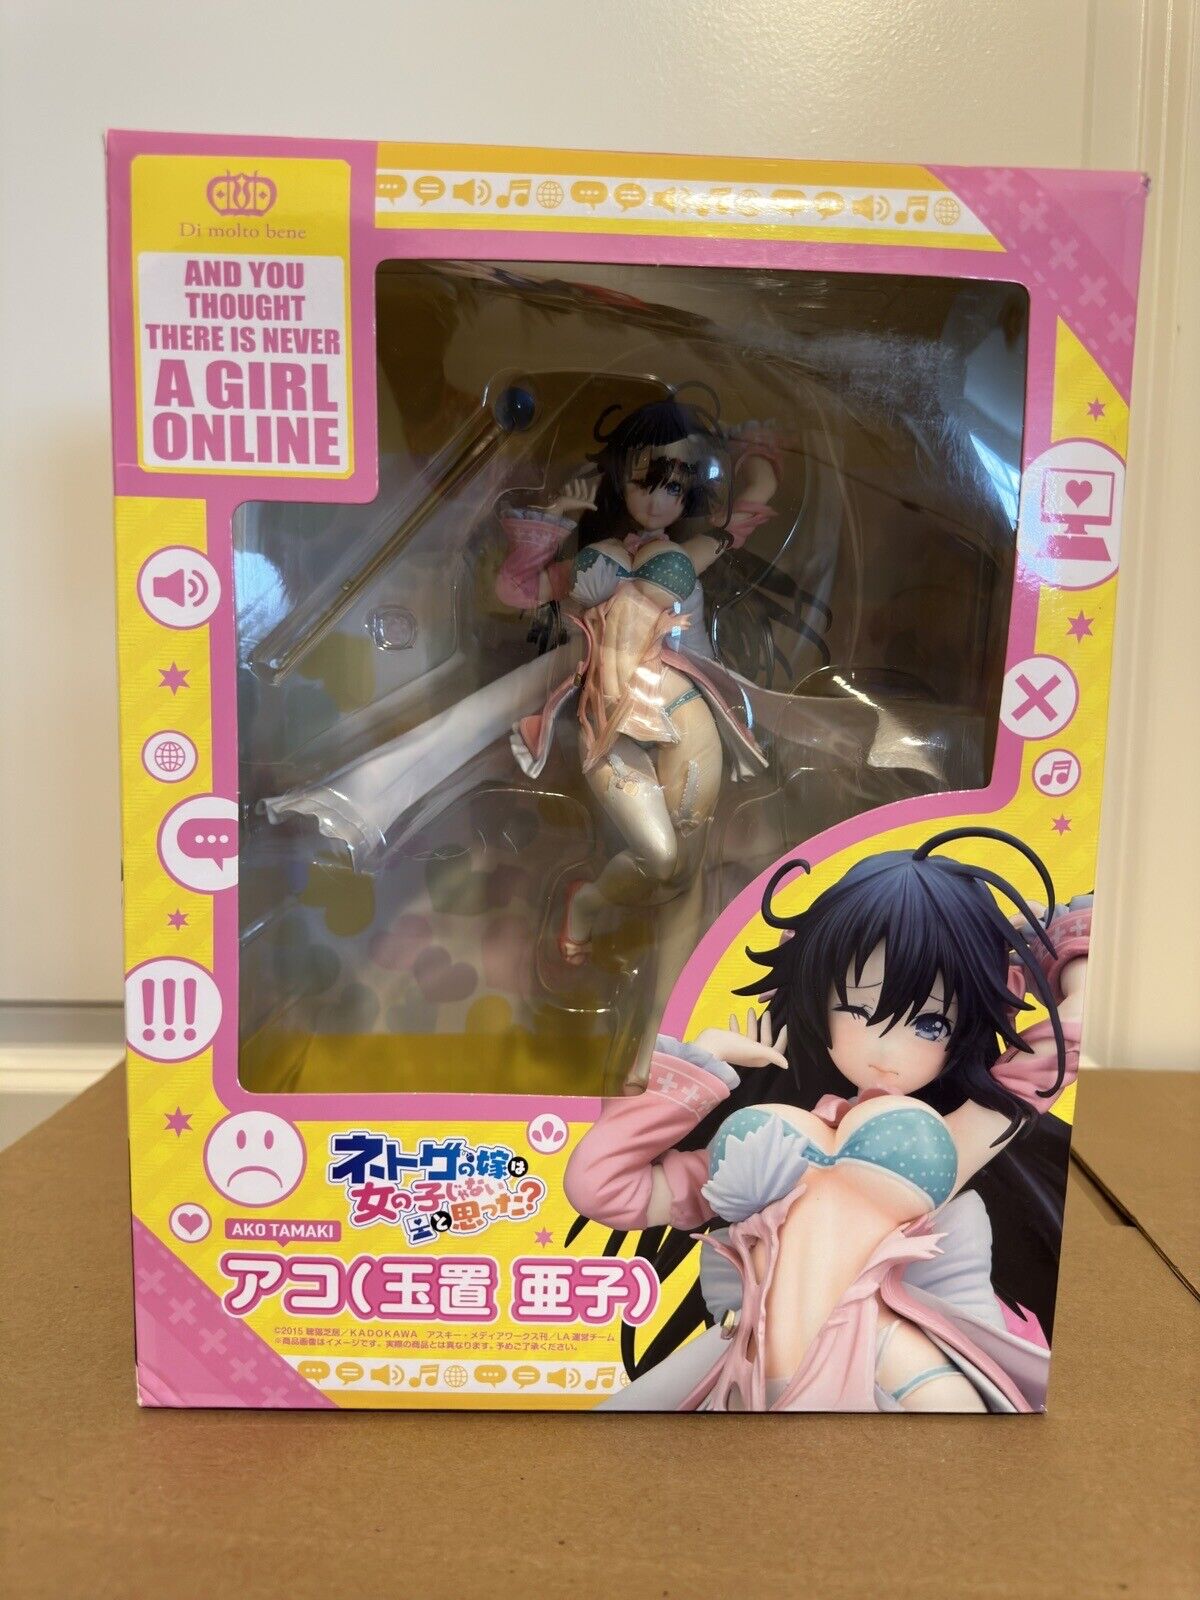 Di molto bene - And You Thought There Is Never a Girl Online? Ako Tamaki Figure